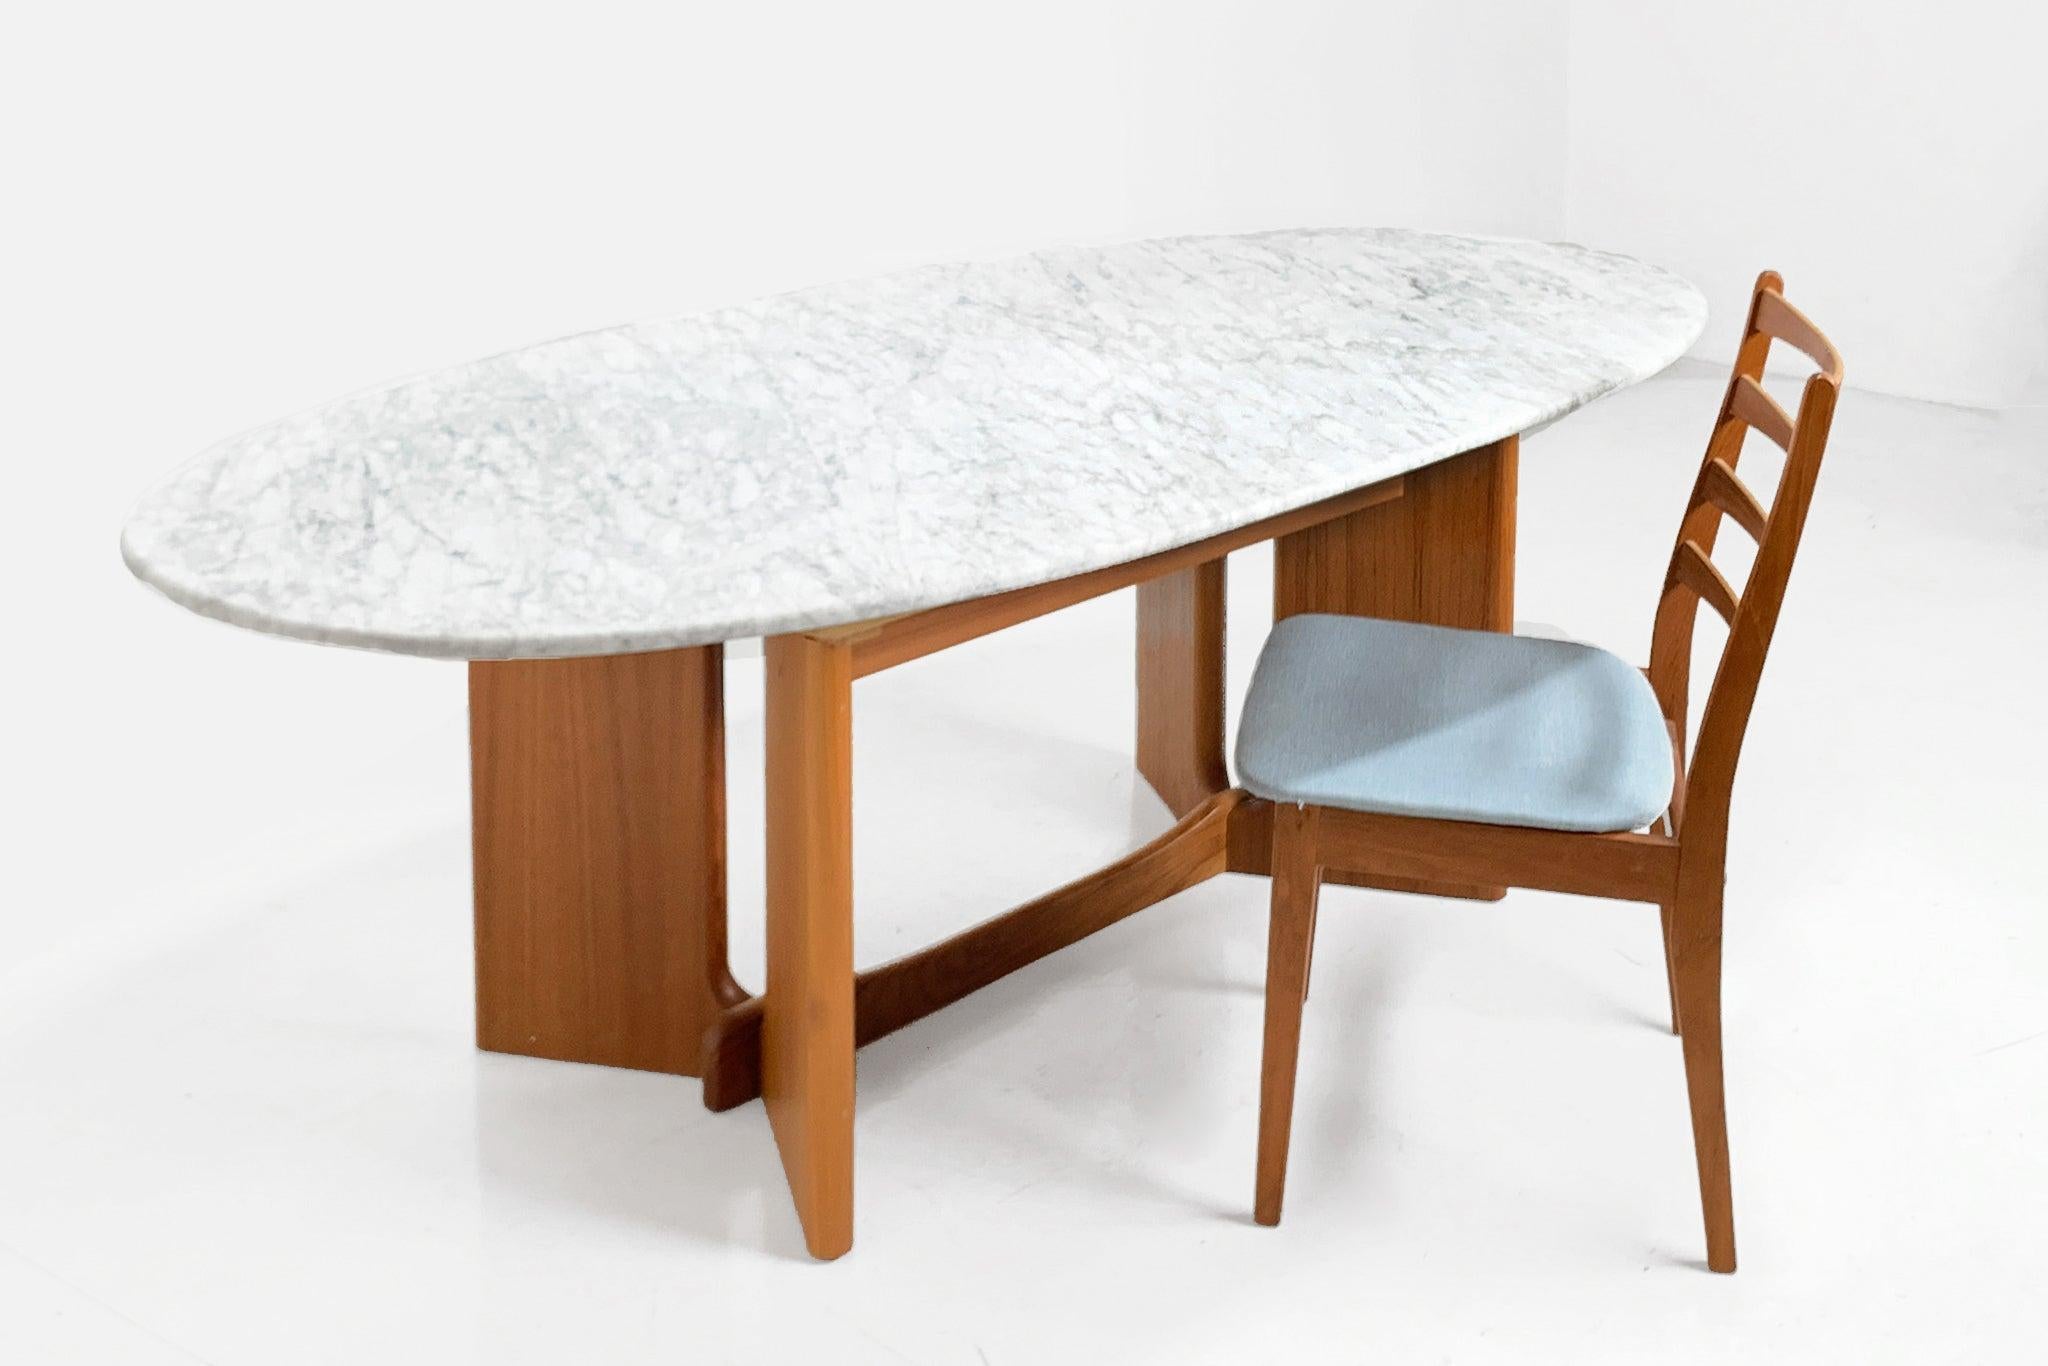 A classic Mid-Century Modern dining table with a teakwood base supports a gorgeous oval slab of Carrara marble. It's the perfect blend of style and substance, whether you're hosting a formal dinner or a casual brunch, its spacious oval shape